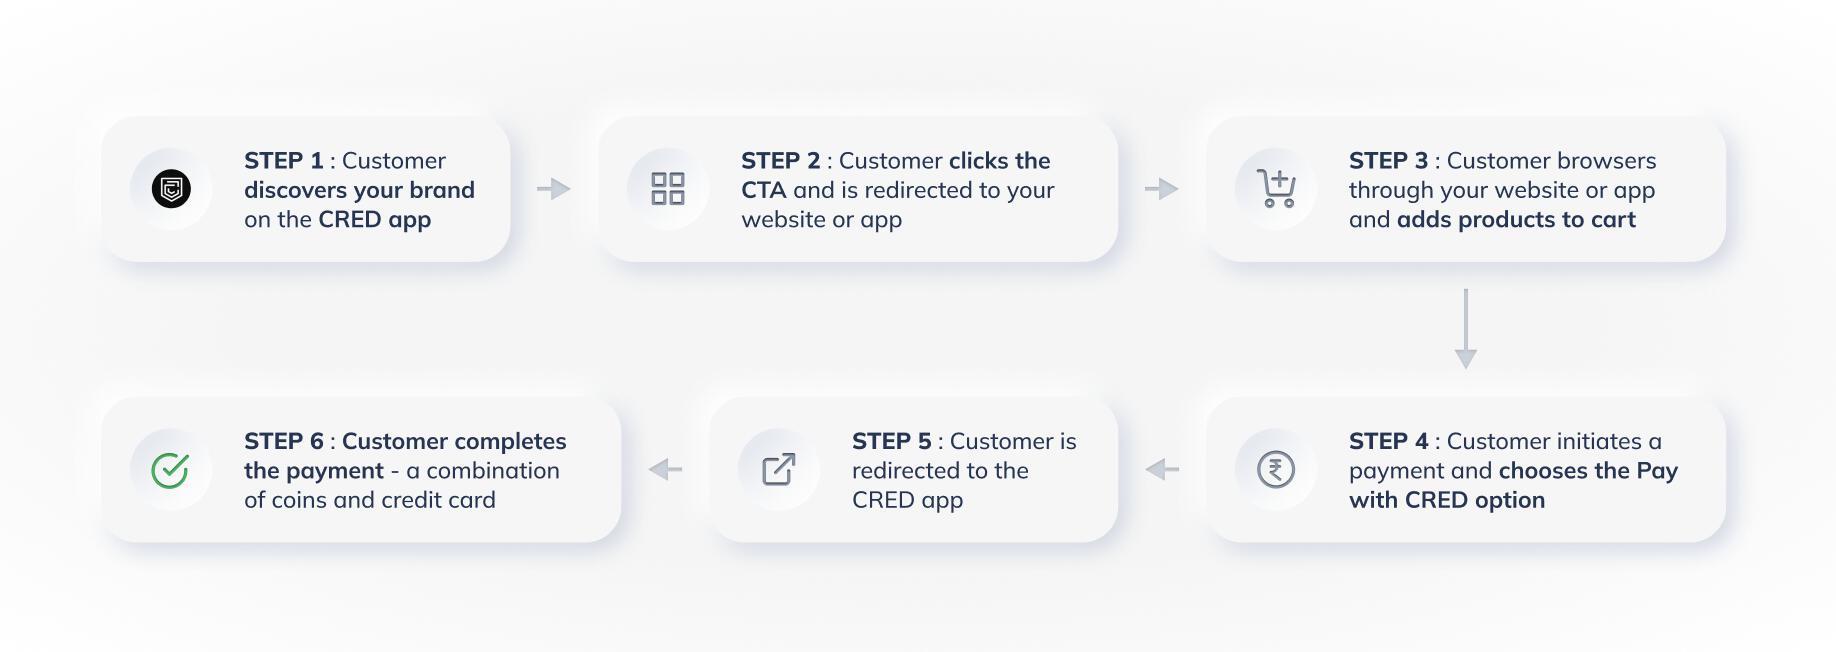 CRED workflow